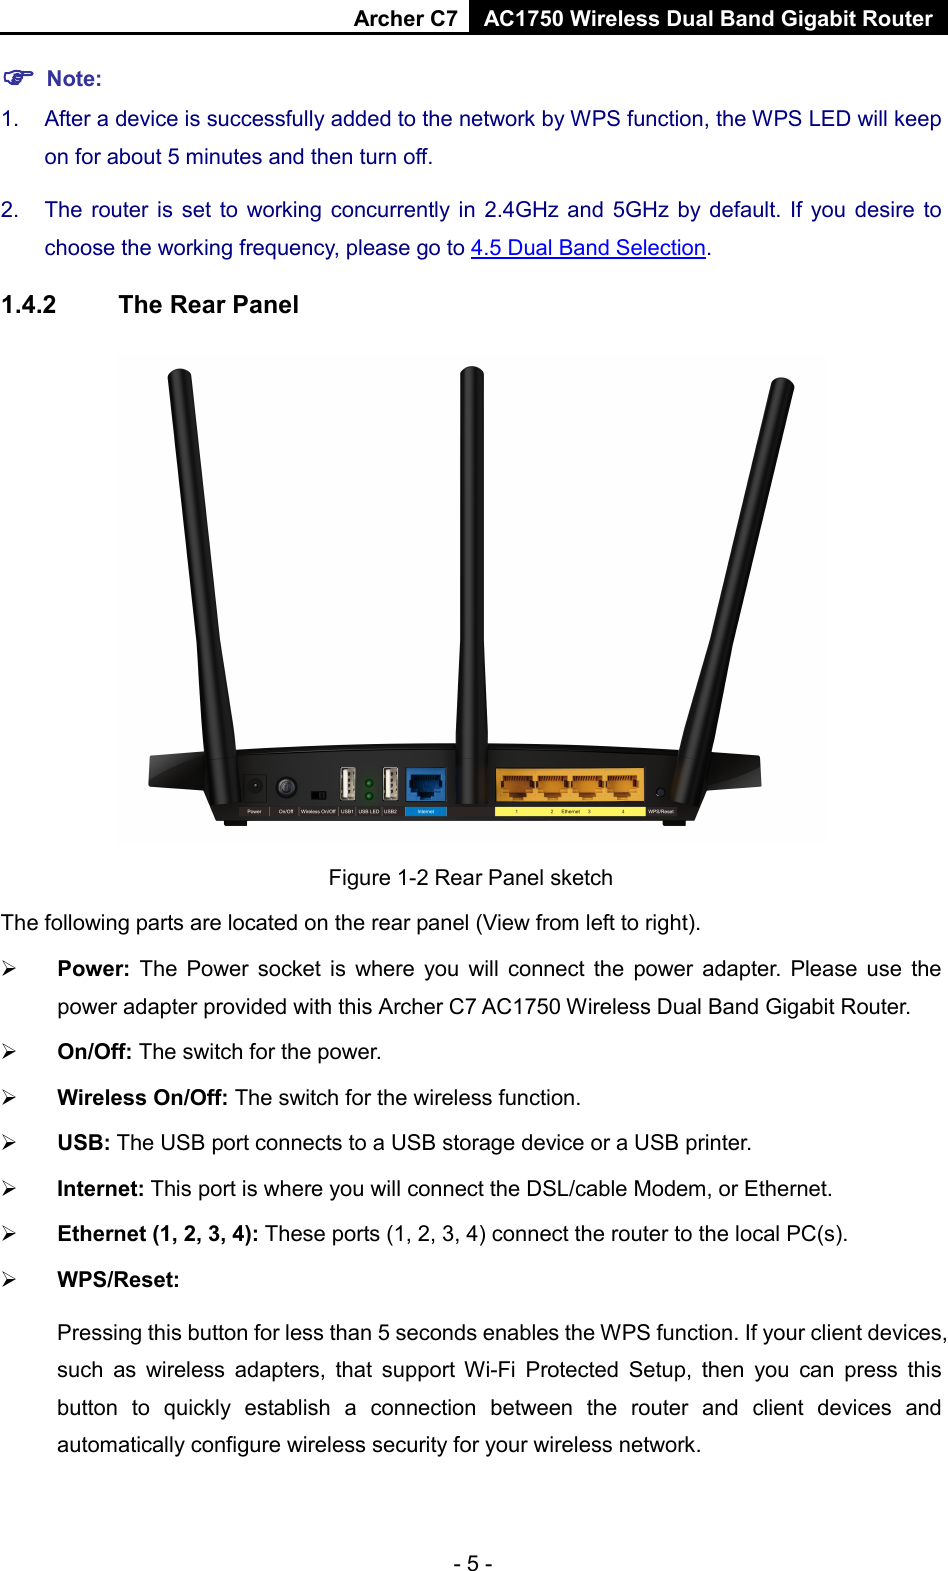 Archer C7 AC1750 Wireless Dual Band Gigabit Router  - 5 -  Note: 1. After a device is successfully added to the network by WPS function, the WPS LED will keep on for about 5 minutes and then turn off.   2. The router is set to working concurrently in 2.4GHz and 5GHz by default. If you desire to choose the working frequency, please go to 4.5 Dual Band Selection. 1.4.2 The Rear Panel  Figure 1-2 Rear Panel sketch The following parts are located on the rear panel (View from left to right).  Power:  The Power socket is where you will connect the power adapter.  Please use the power adapter provided with this Archer C7 AC1750 Wireless Dual Band Gigabit Router.  On/Off: The switch for the power.  Wireless On/Off: The switch for the wireless function.  USB: The USB port connects to a USB storage device or a USB printer.  Internet: This port is where you will connect the DSL/cable Modem, or Ethernet.  Ethernet (1, 2, 3, 4): These ports (1, 2, 3, 4) connect the router to the local PC(s).  WPS/Reset:   Pressing this button for less than 5 seconds enables the WPS function. If your client devices, such as wireless adapters, that support Wi-Fi  Protected Setup, then you can press this button to quickly  establish a connection between the router and client devices and automatically configure wireless security for your wireless network.   